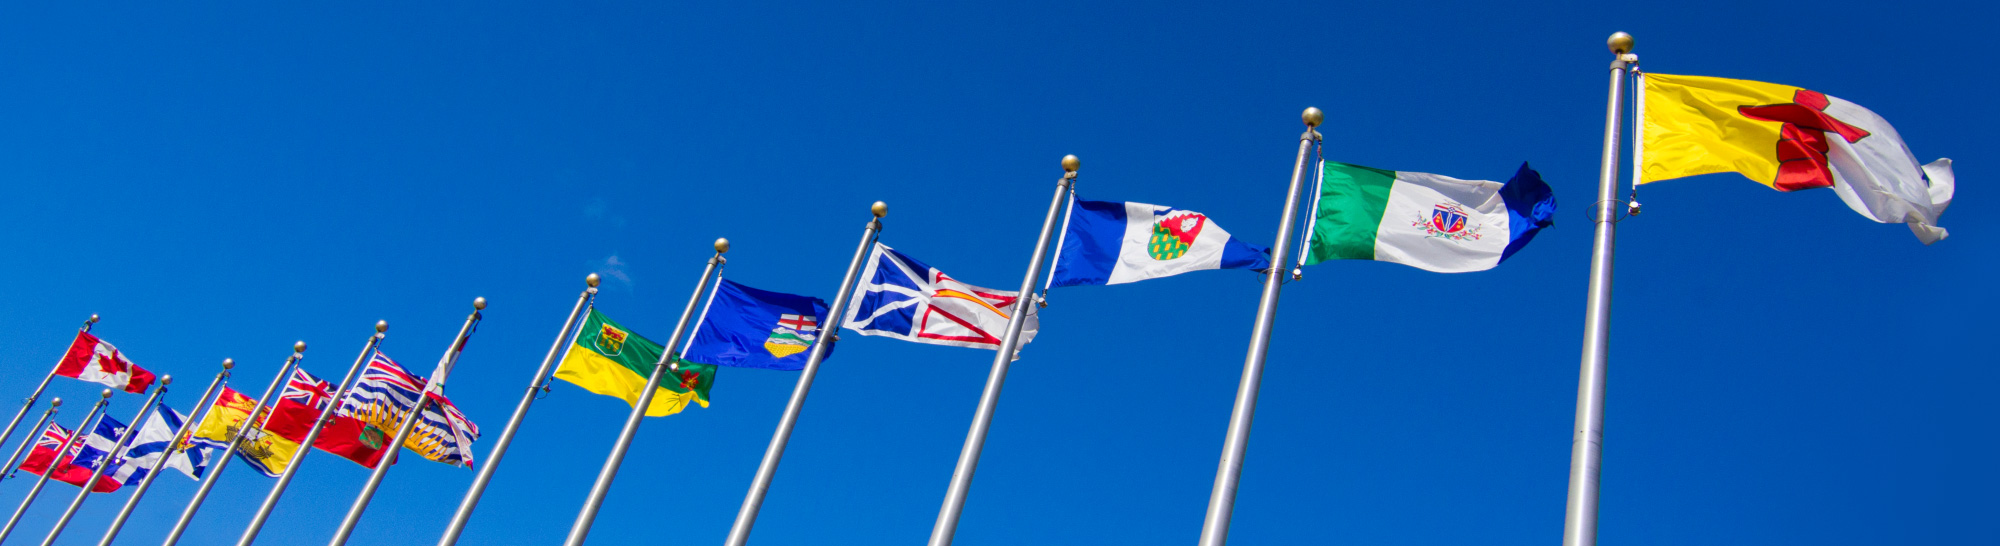 Provincial flags